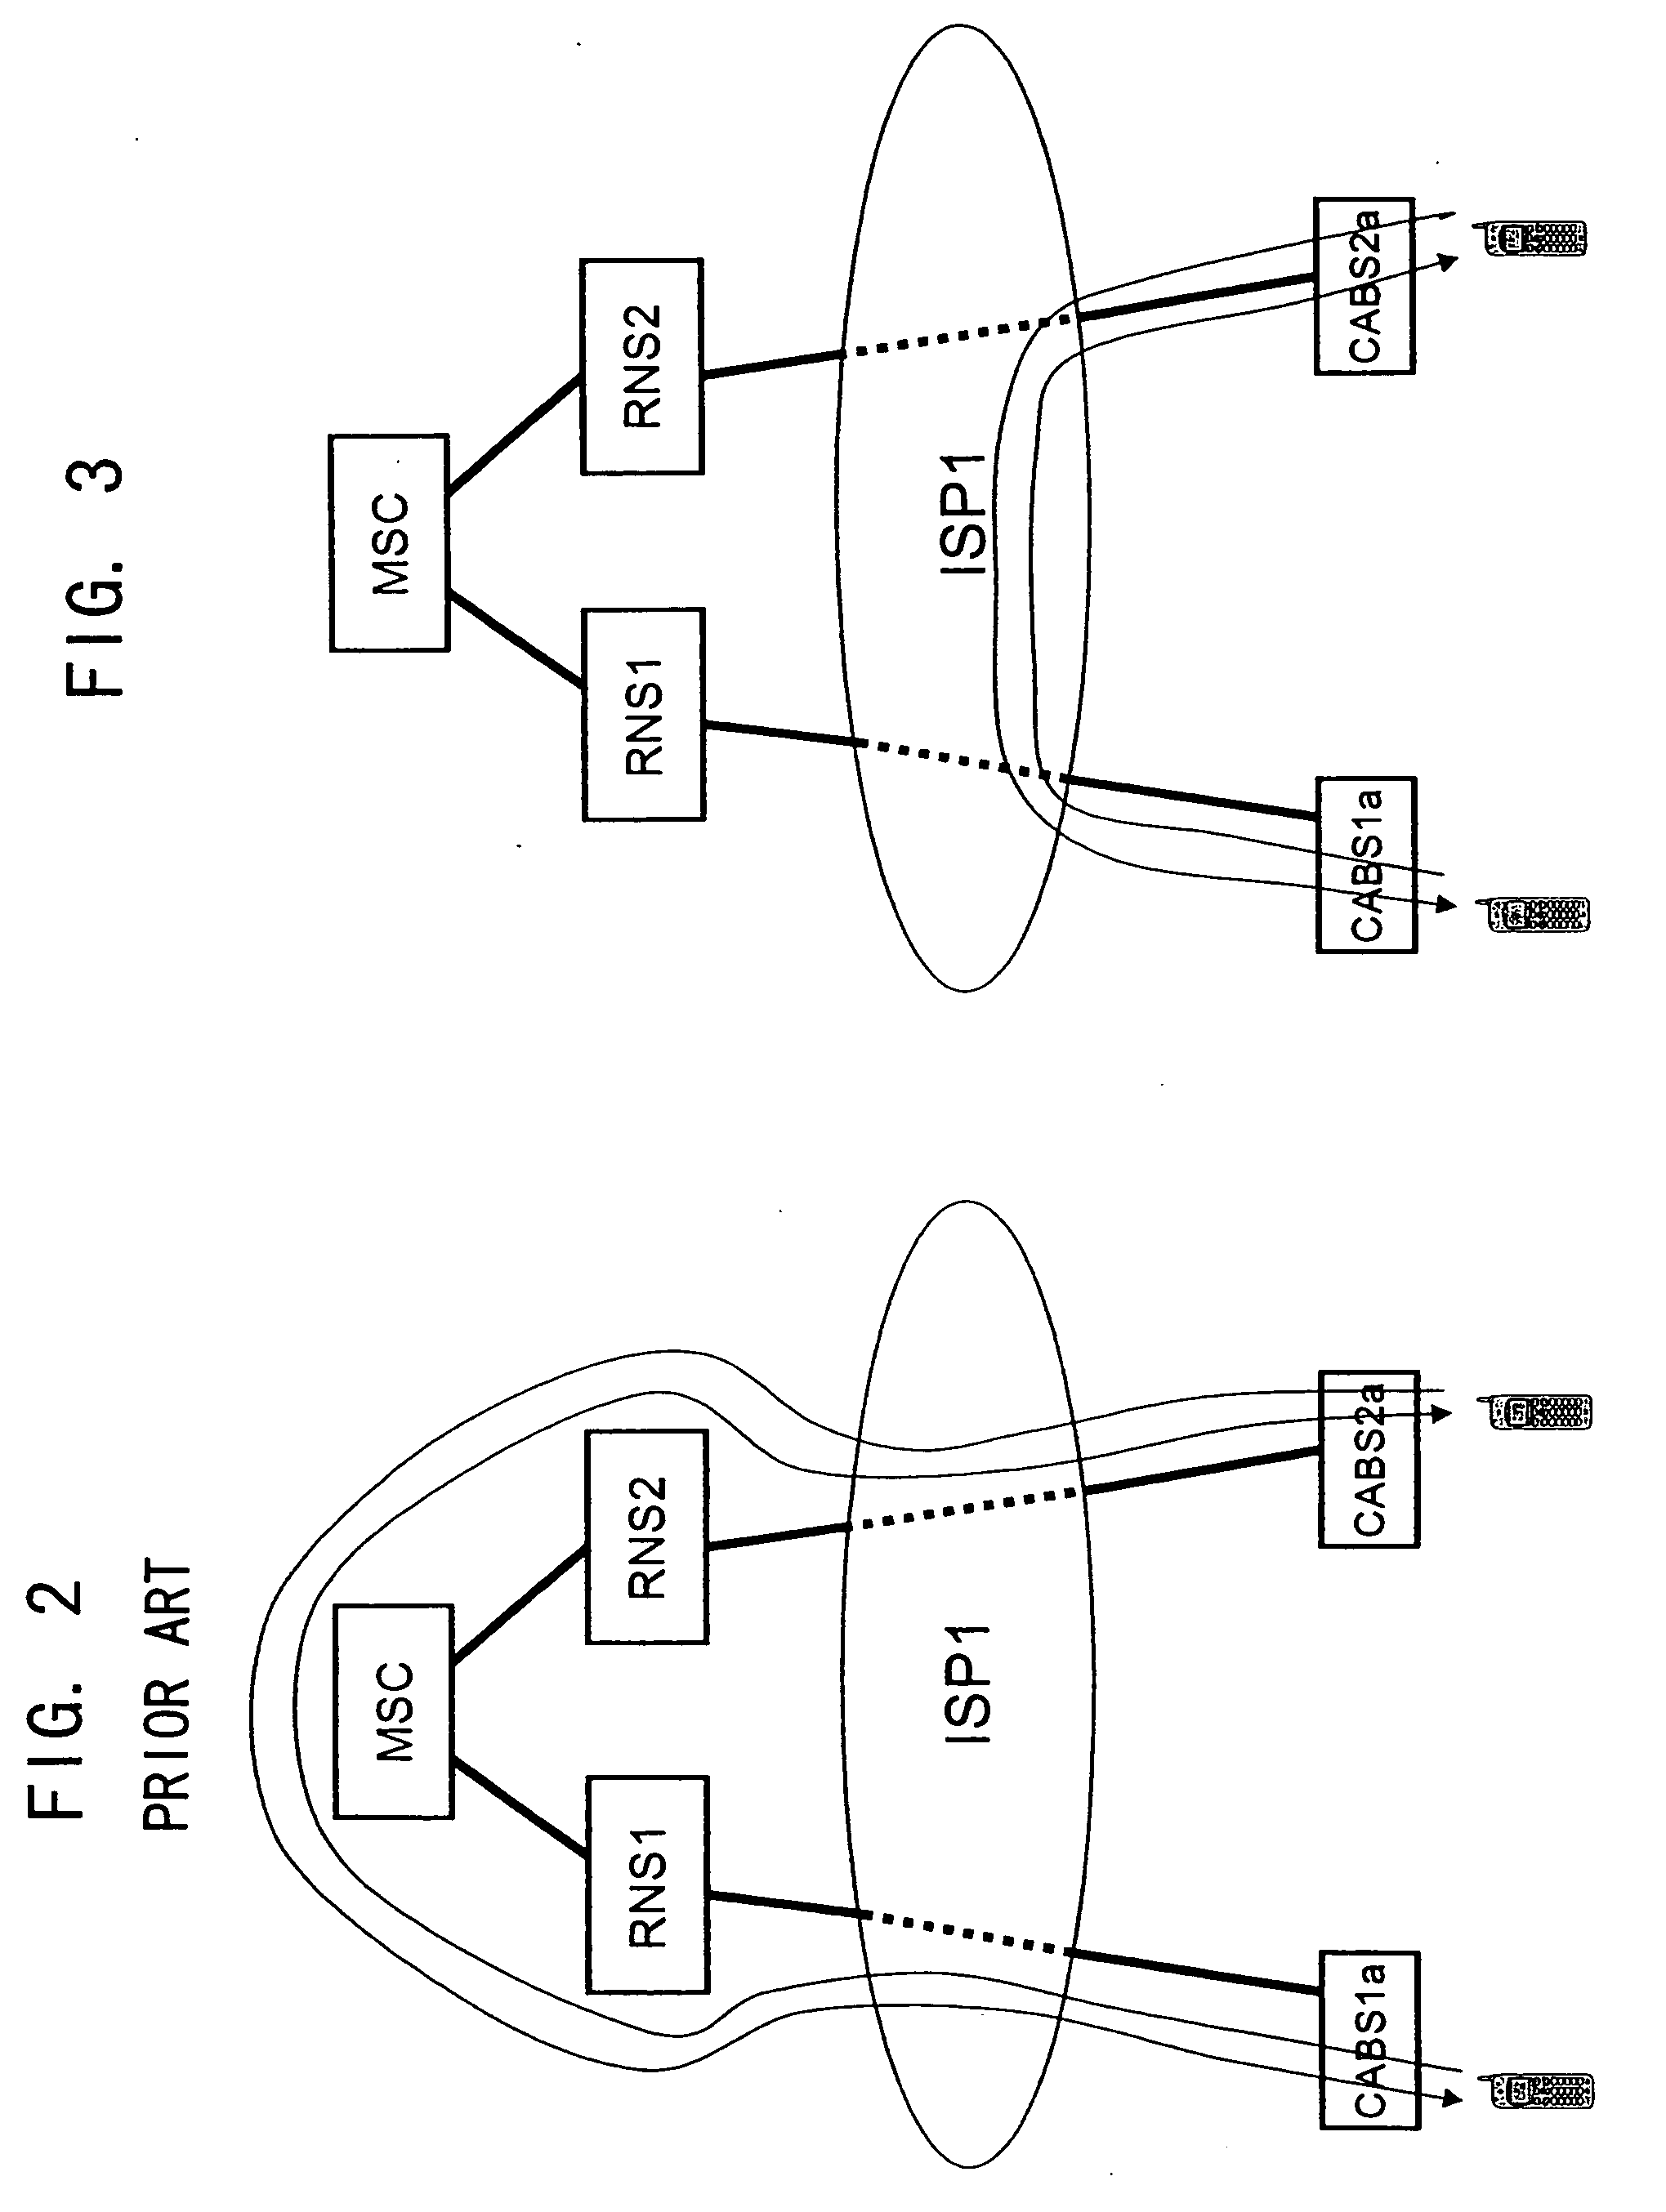 System for establishing data transmission path between mobile phone terminals